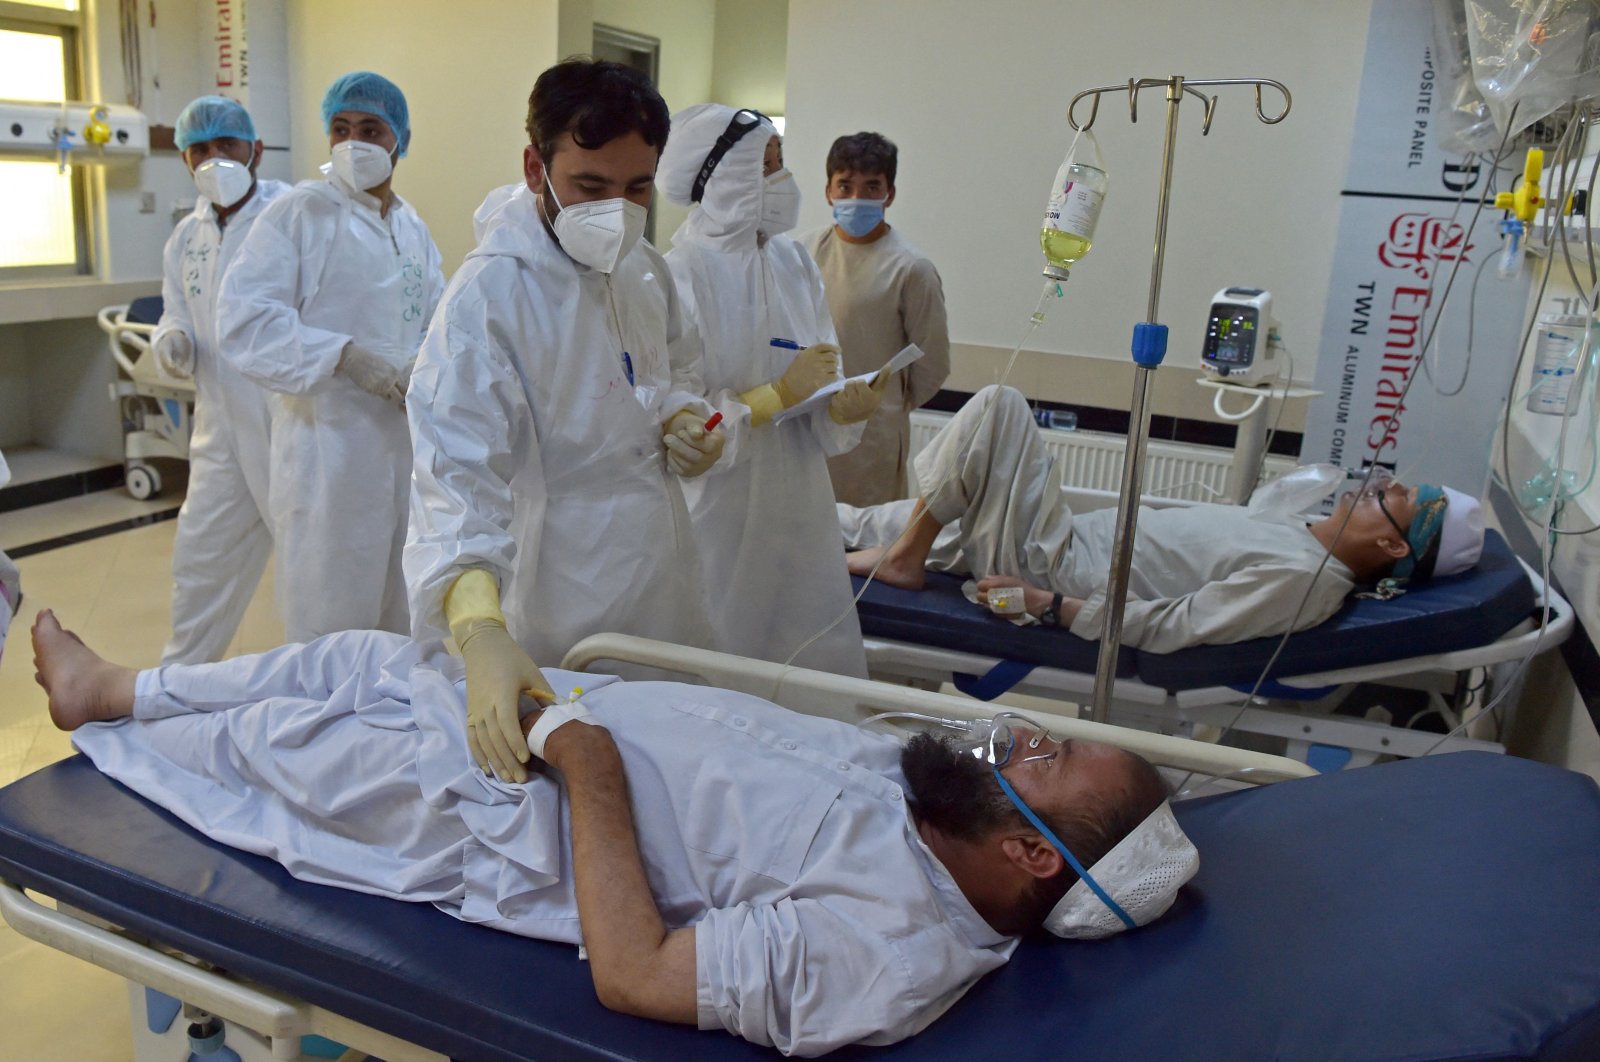 Medical personnel treat the coronavirus patients at the intensive care unit (ICU) of the Muhammed Ali Jinnah hospital in Kabul, Afghanistan, June 8, 2021. (AFP Photo)